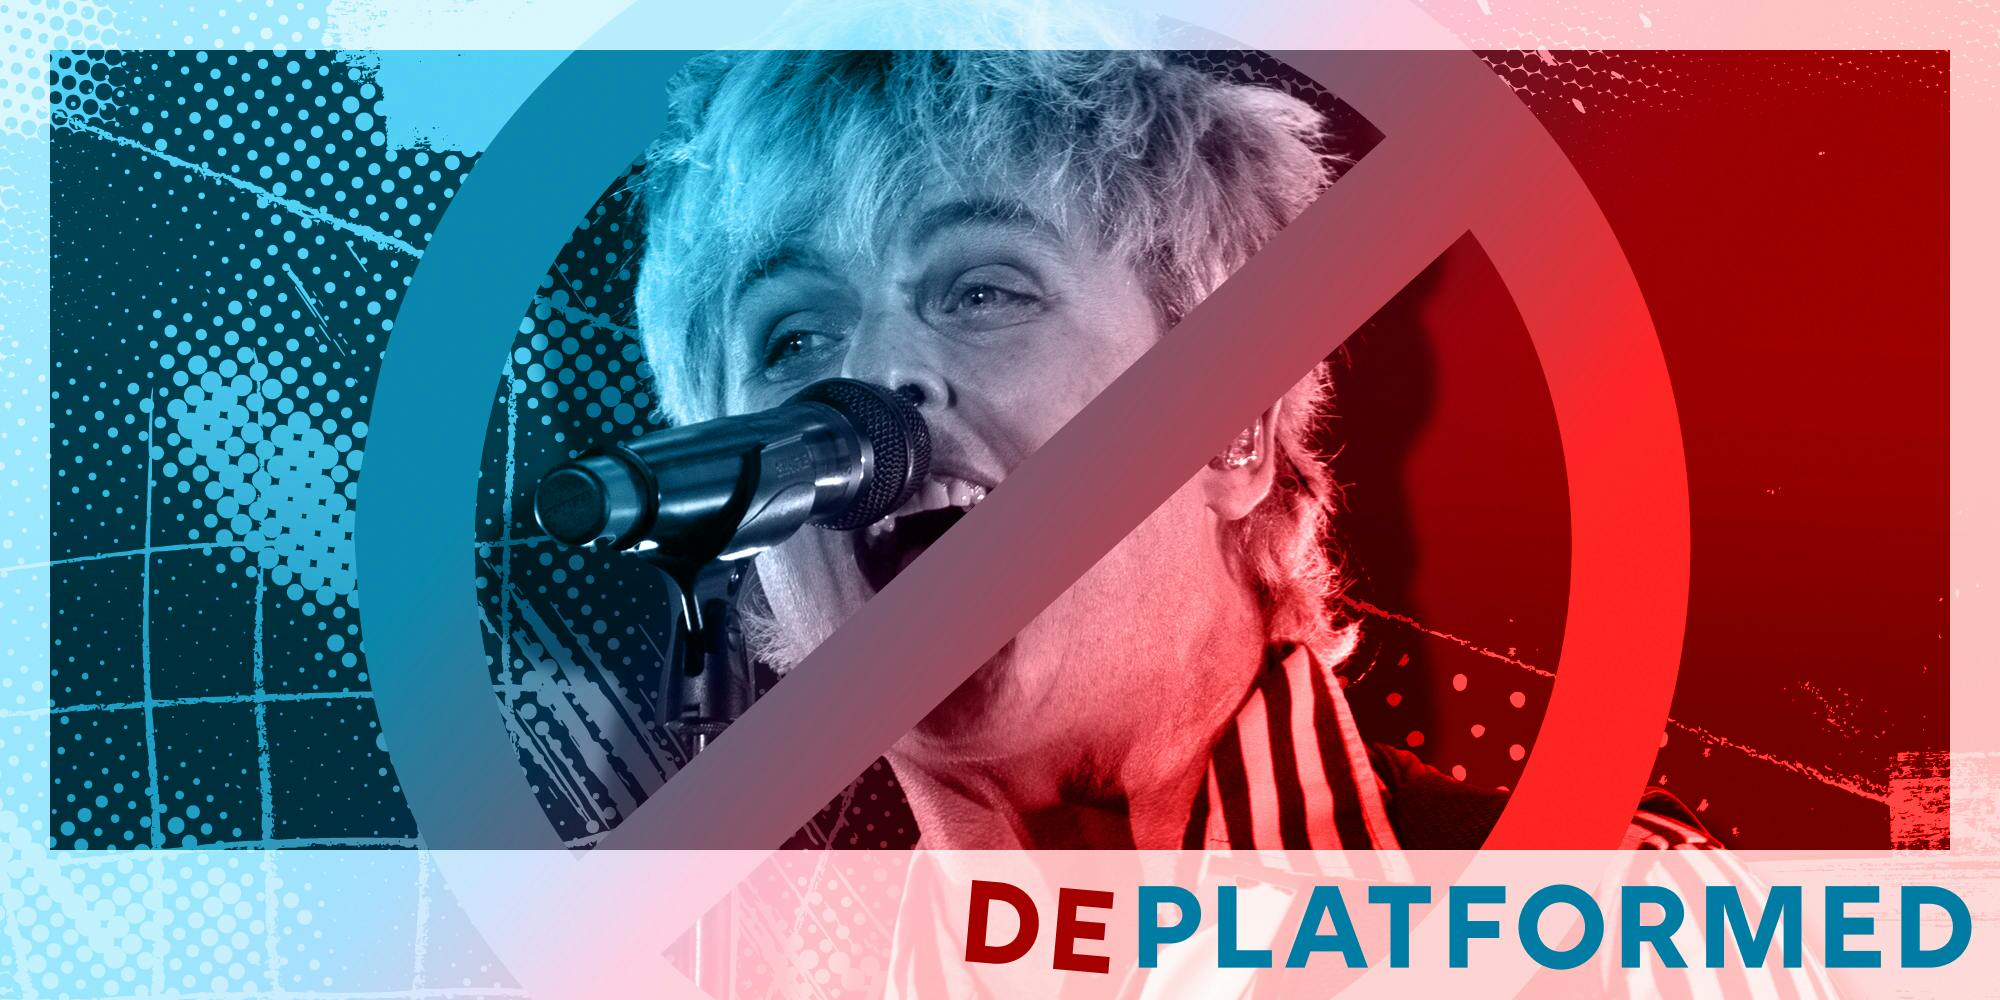 Billy Joe Armstrong of Green Day singing with a red circle with a line through it over him. There is text that says 'Deplatformed' in a Daily Dot newsletter web_crawlr font in the bottom right corner.